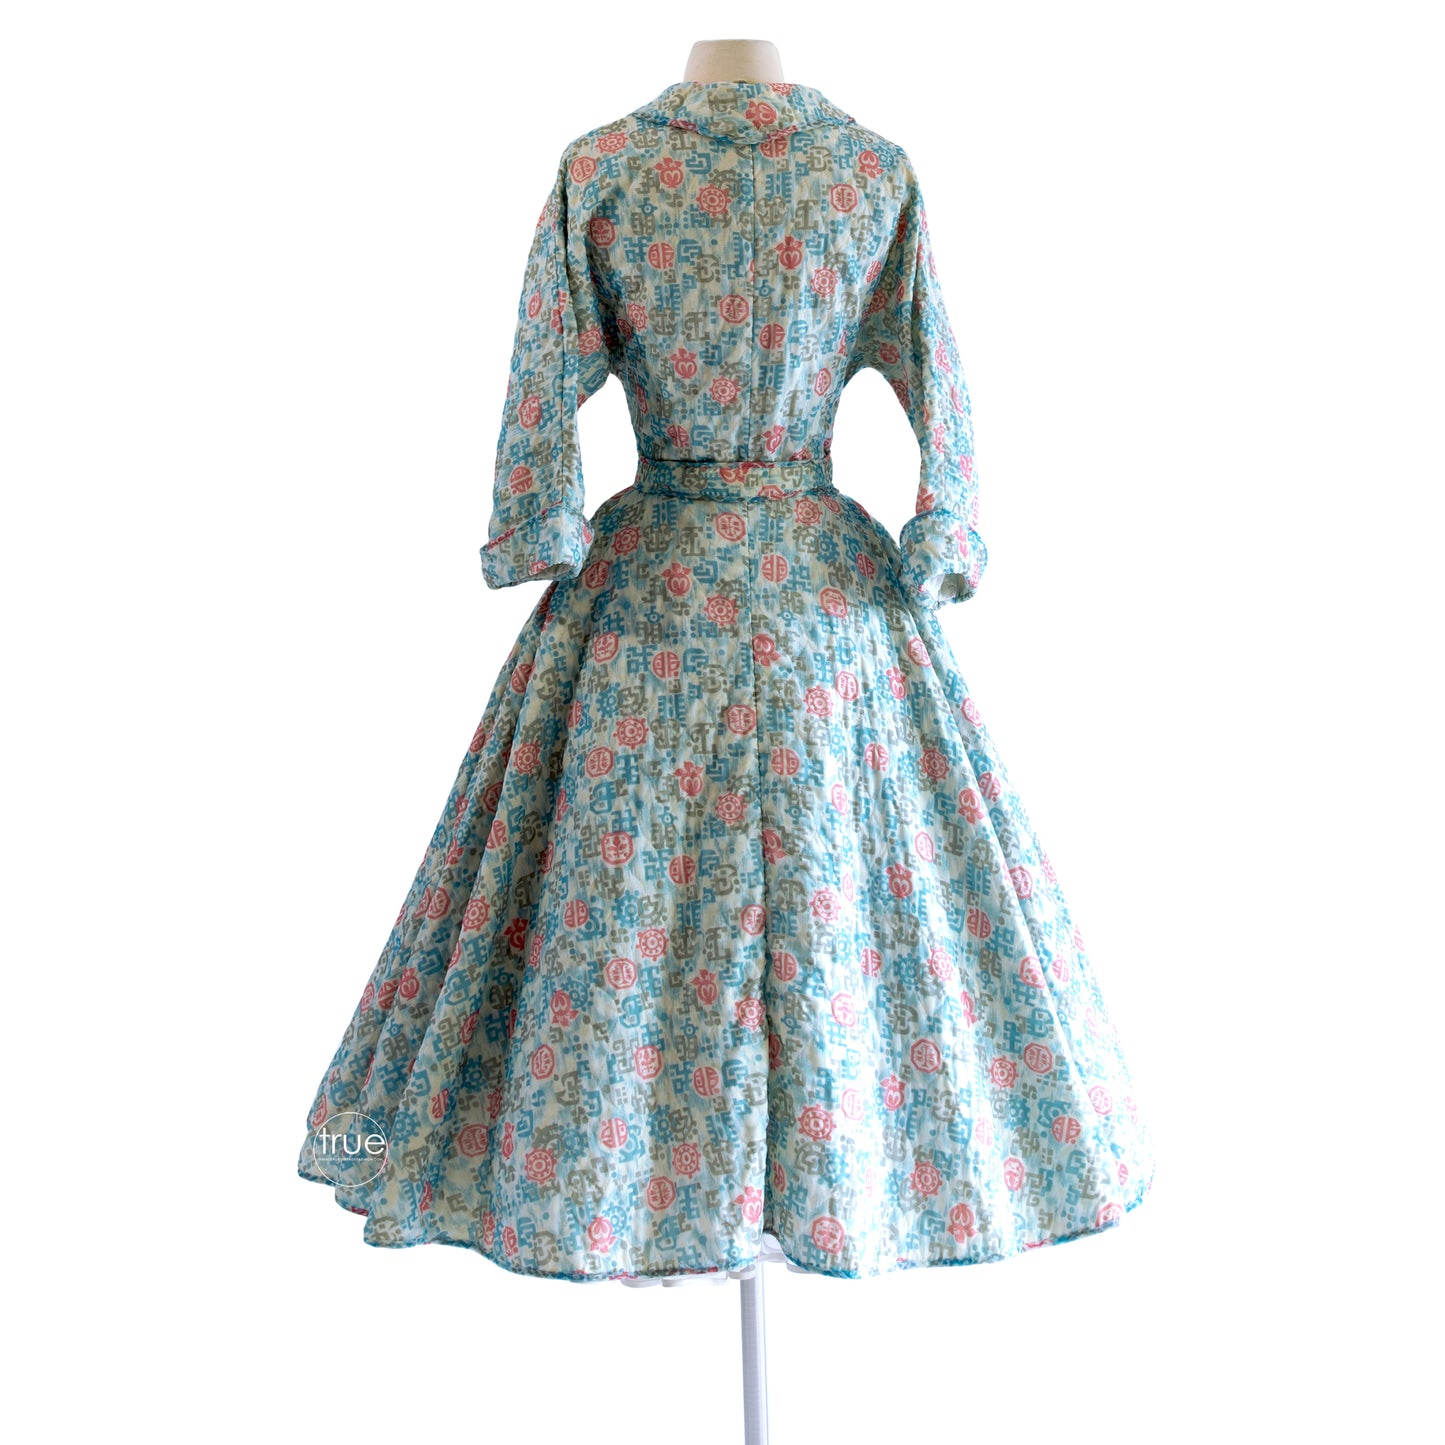 vintage 1950's dress ...dreamy LOUNGEES quilted dressing gown robe dress